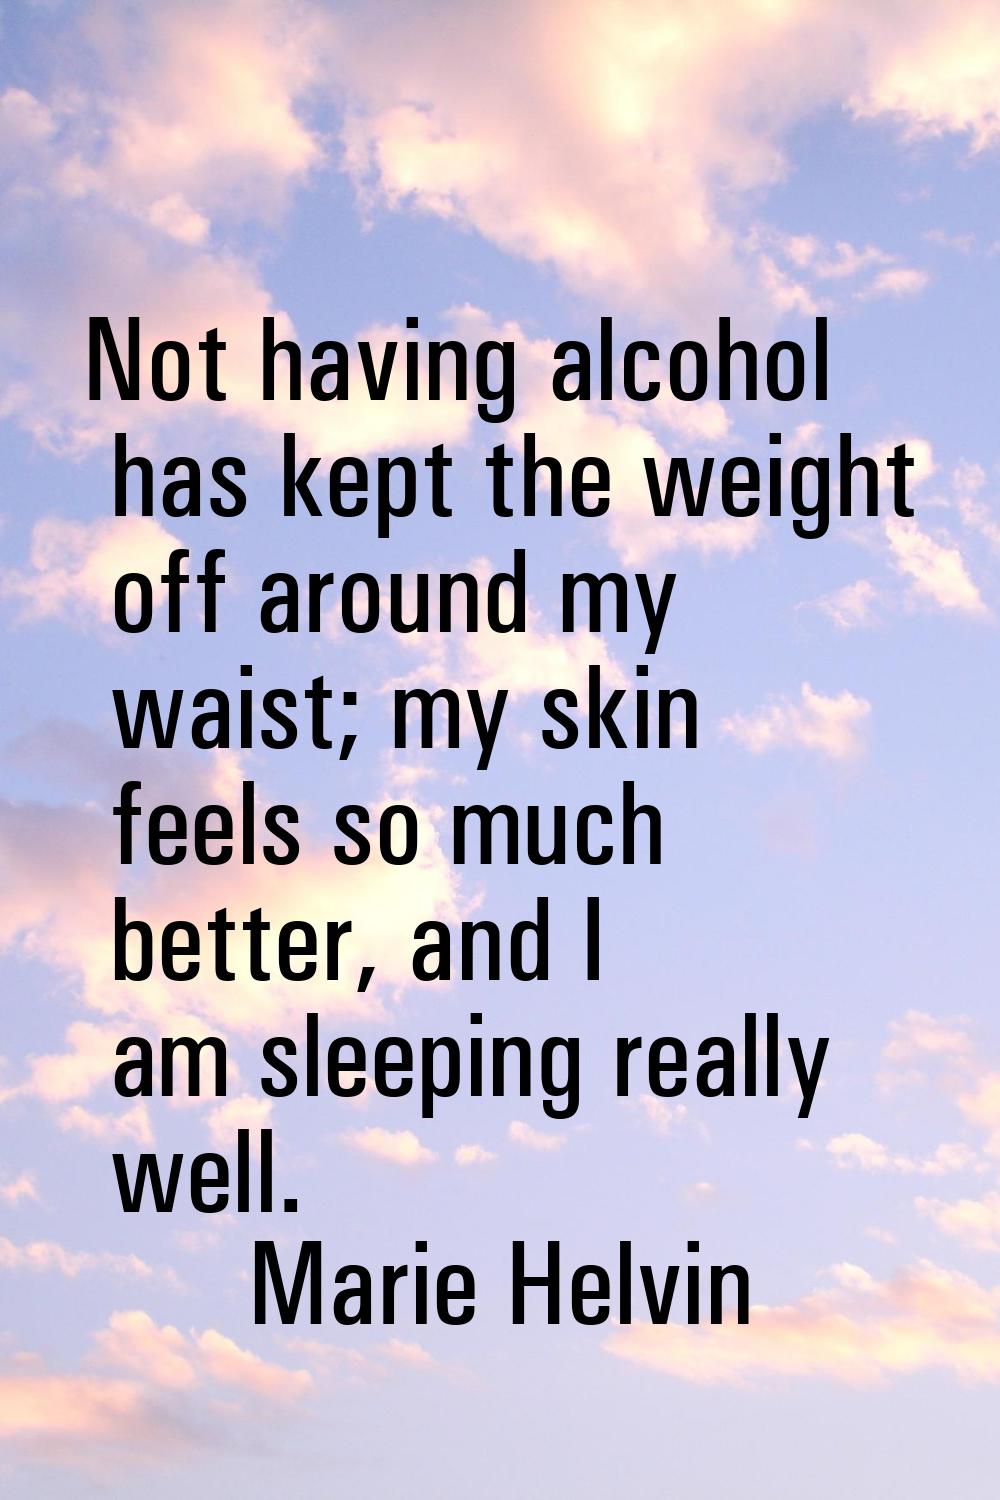 Not having alcohol has kept the weight off around my waist; my skin feels so much better, and I am 